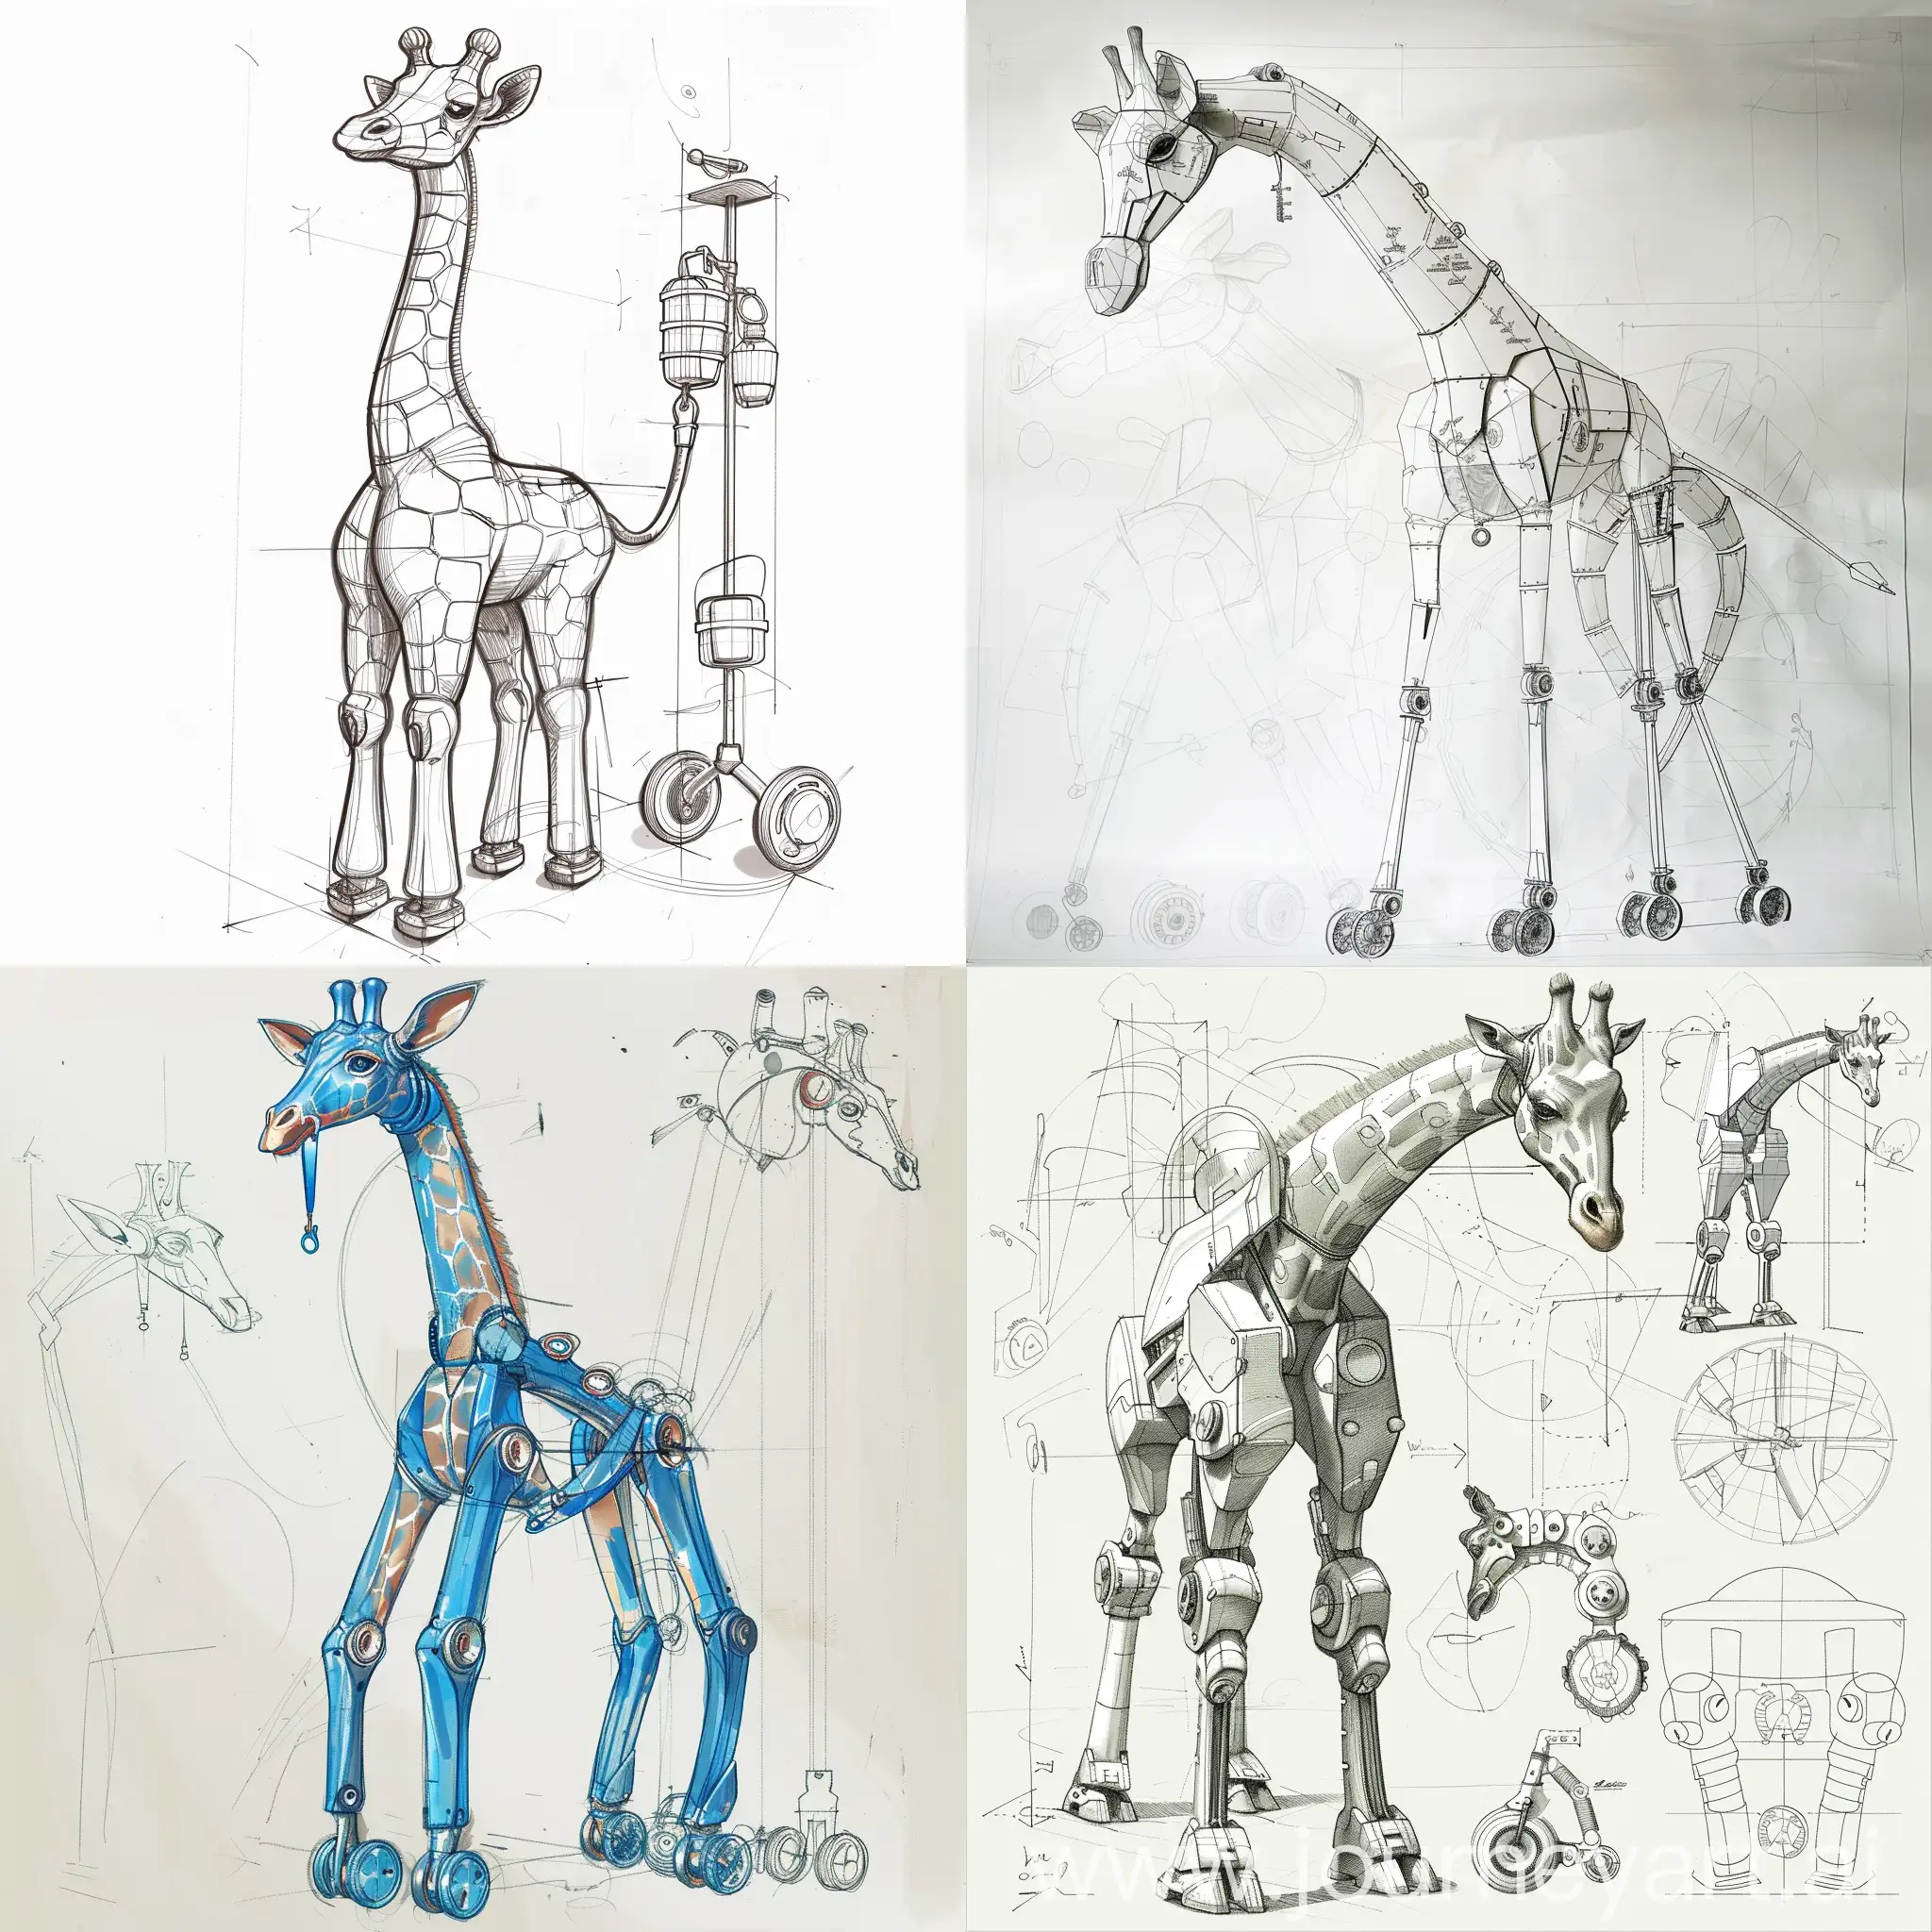 Bionic giraffe shape, design giraffe shaped saltwater hanging rod, giraffe antlers and ears as the hook part, can be used to hang the liquid bag, extract the giraffe neck elements, make into a telescopic rod, can adjust the height, giraffe feet are designed as wheels, can be pushed, easy to move, design saltwater hanging rod, product design sketch, line draft, white background, Deduction process, without color, various directions of the drawing, product design hand-painted